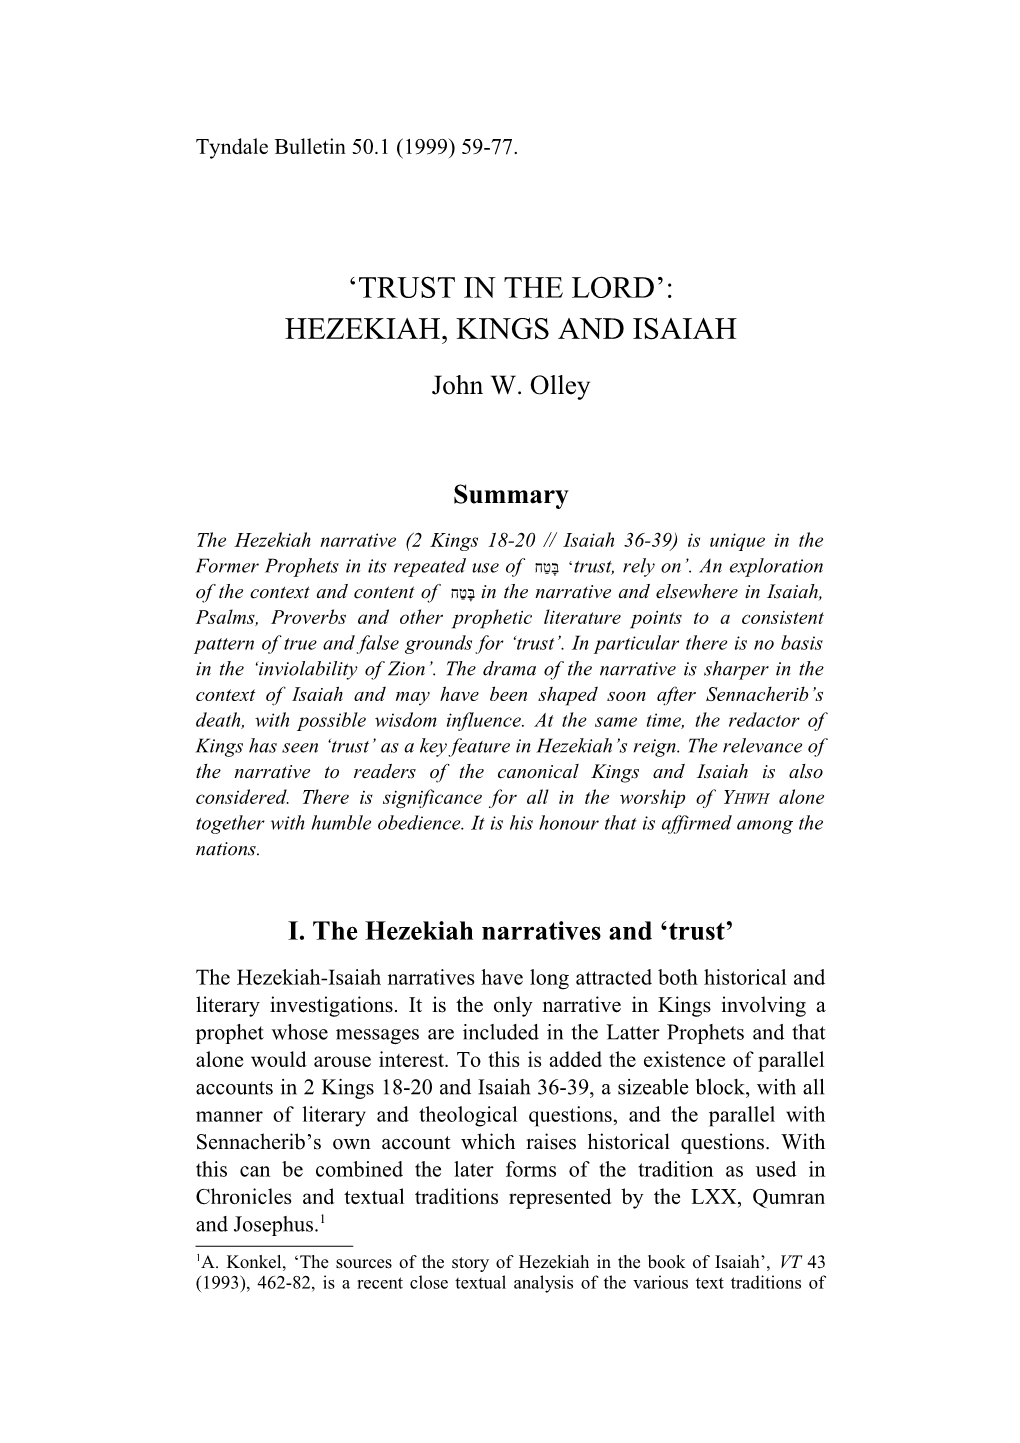 Beyond 700 BCE: Trust in the Lord , Hezekiah, Kings and Isaiah